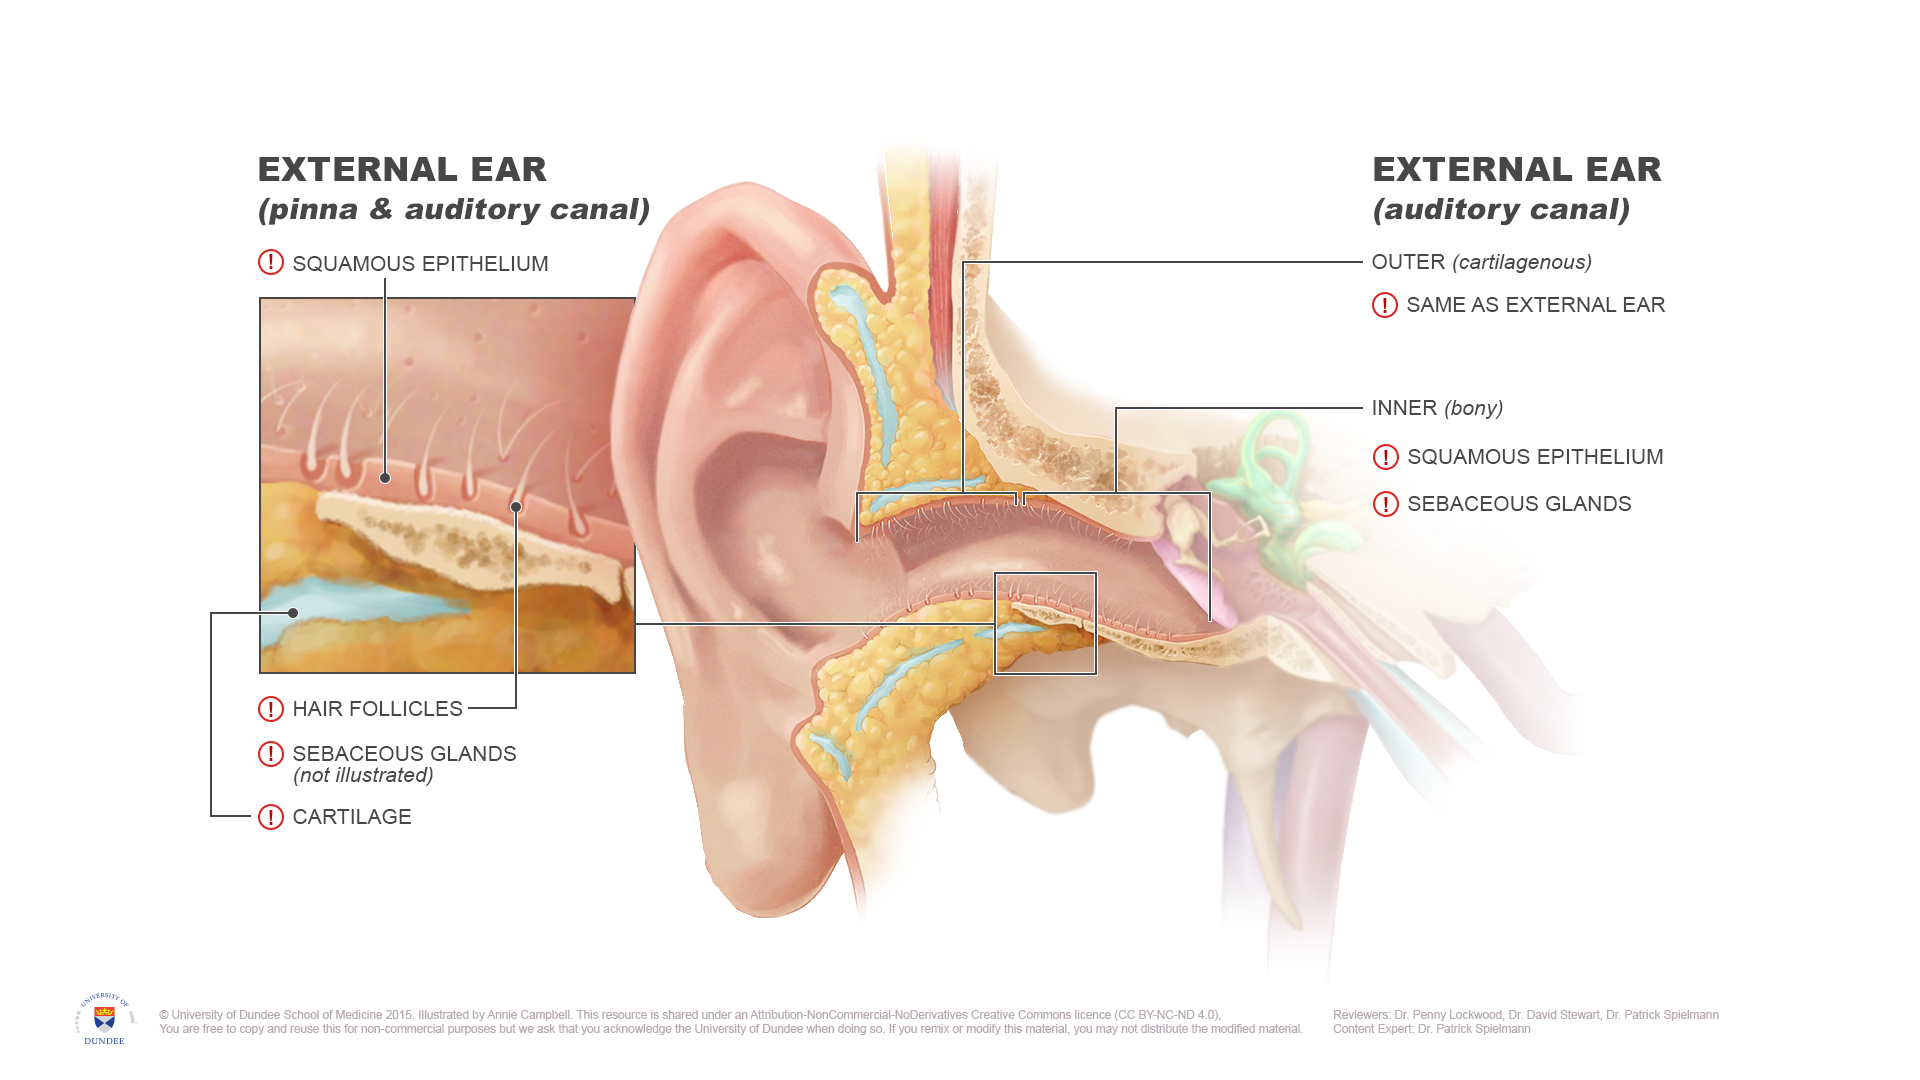 Inner and outer ear anatomy - hir follicles, glands, cartilage, epithelium